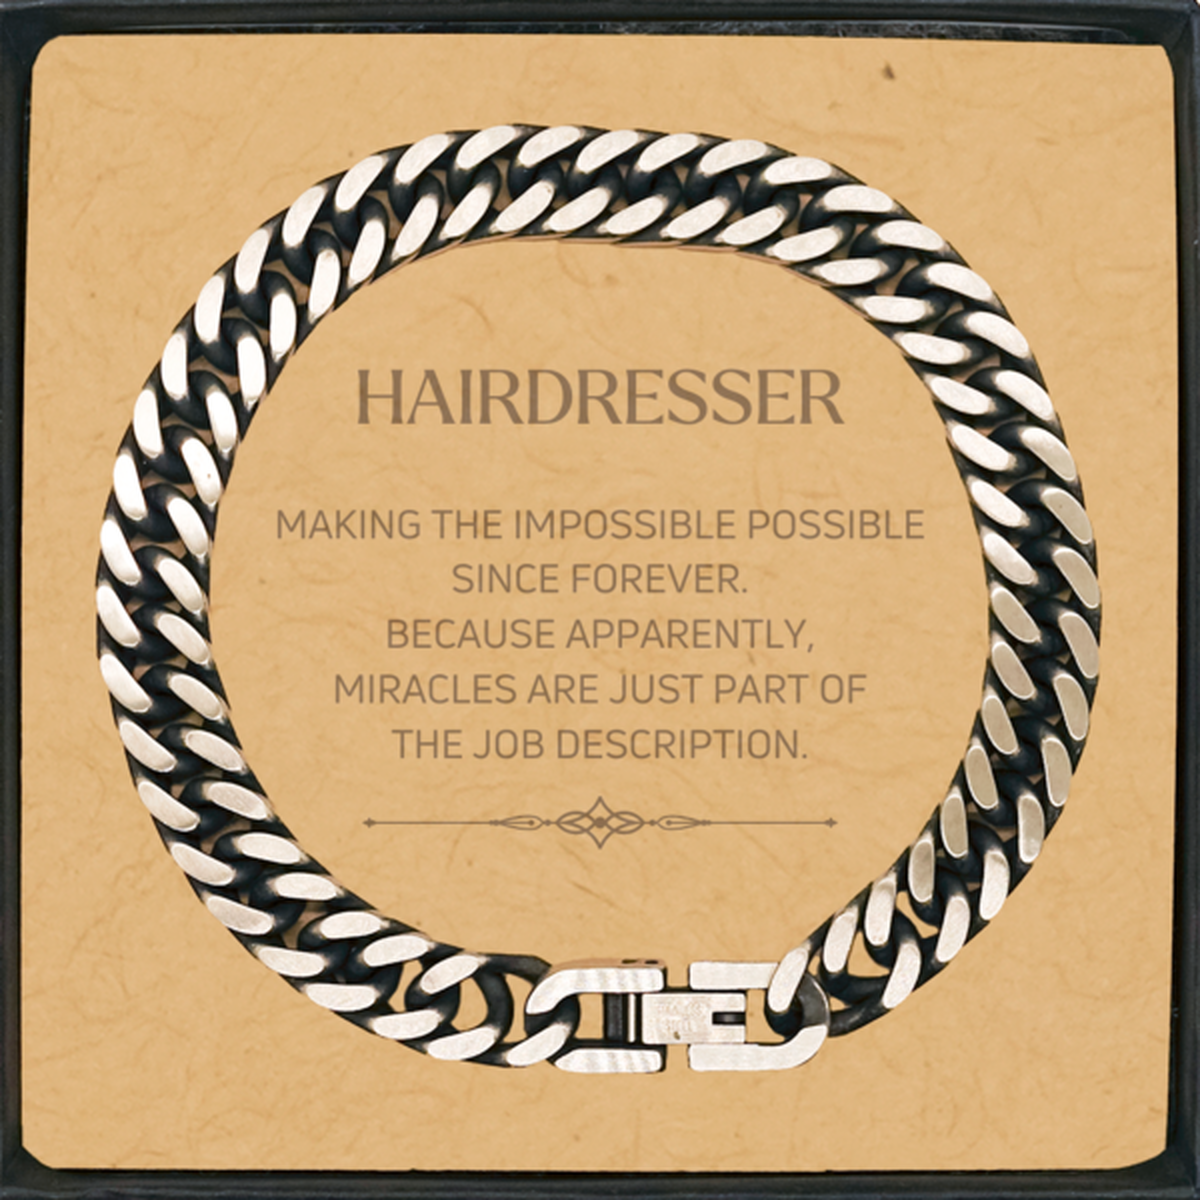 Funny Hairdresser Gifts, Miracles are just part of the job description, Inspirational Birthday Cuban Link Chain Bracelet For Hairdresser, Men, Women, Coworkers, Friends, Boss